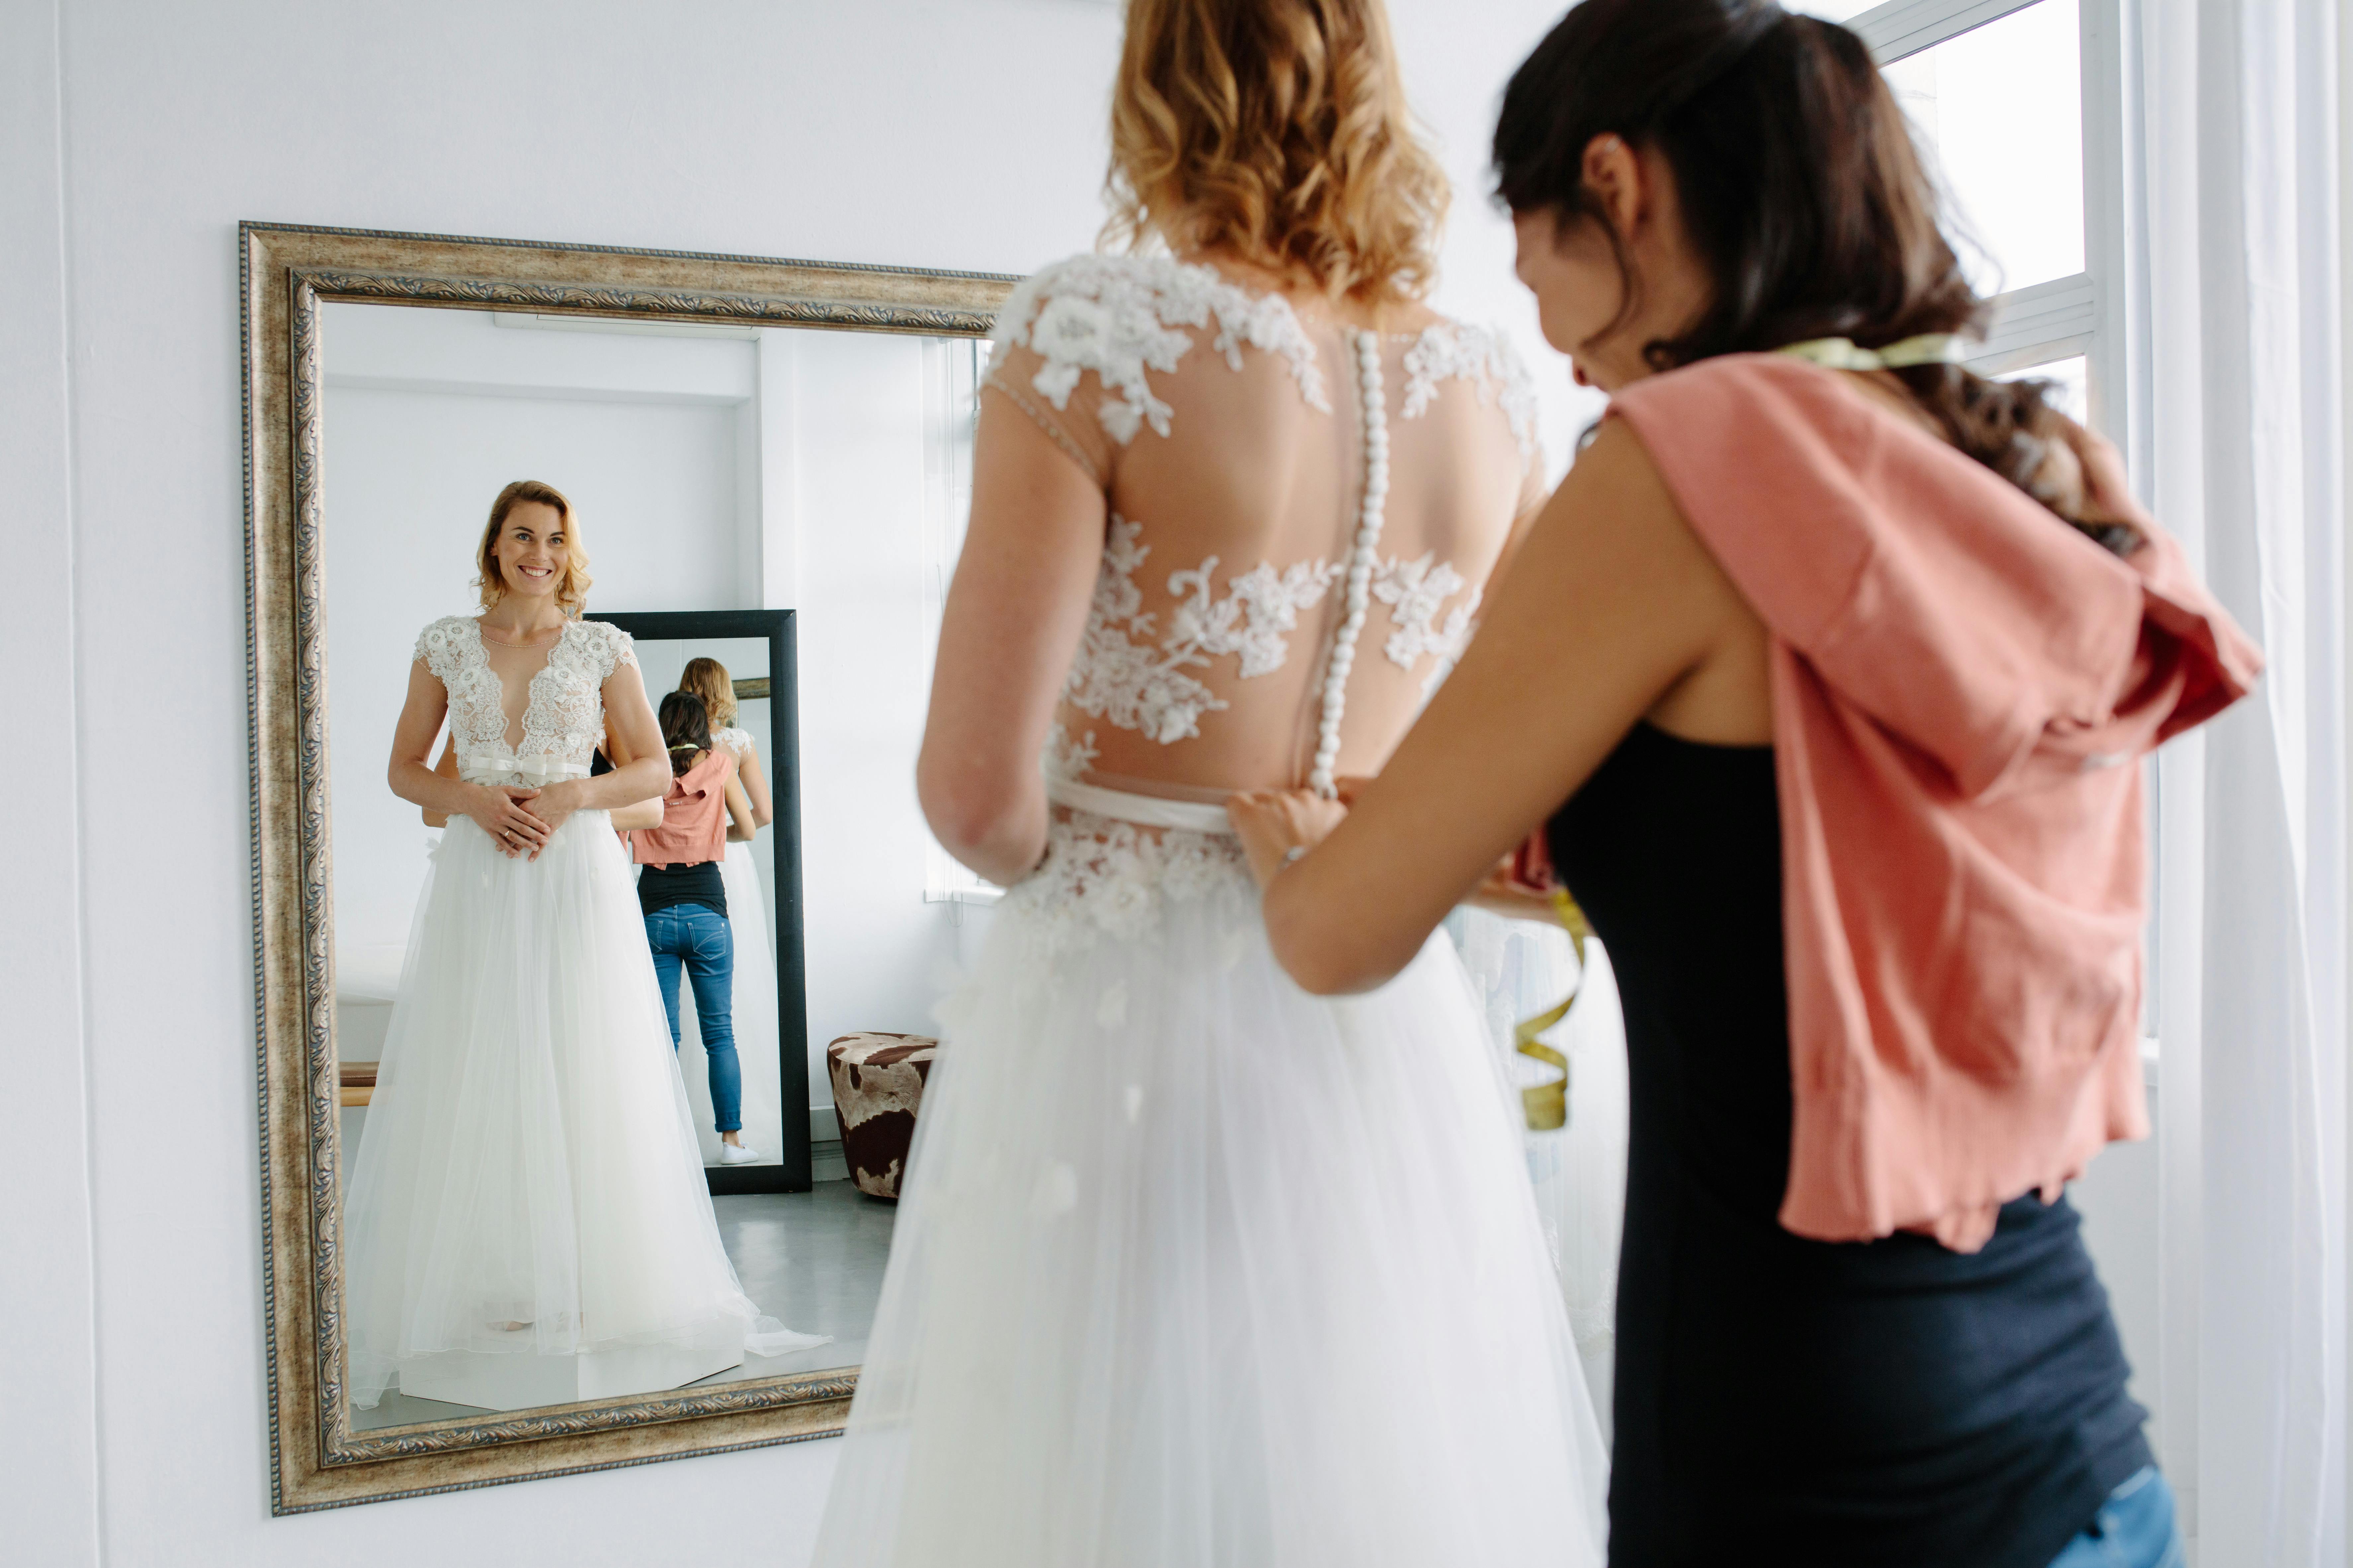 25 Stores to Find Affordable Wedding Dresses